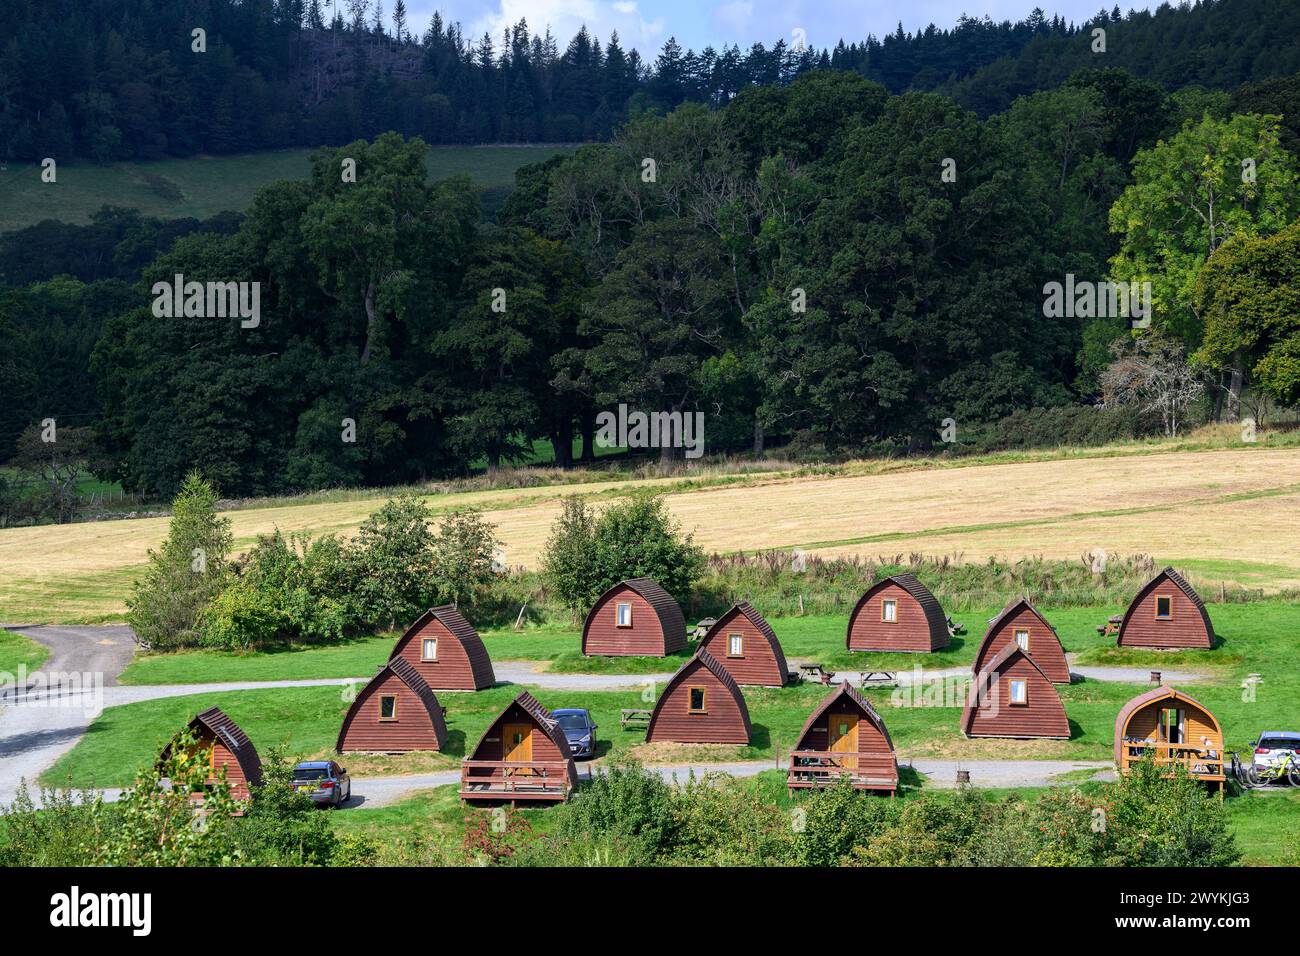 Glentress, Écosse, 7 states Mountain bike centre, Glamping, wigwam Banque D'Images